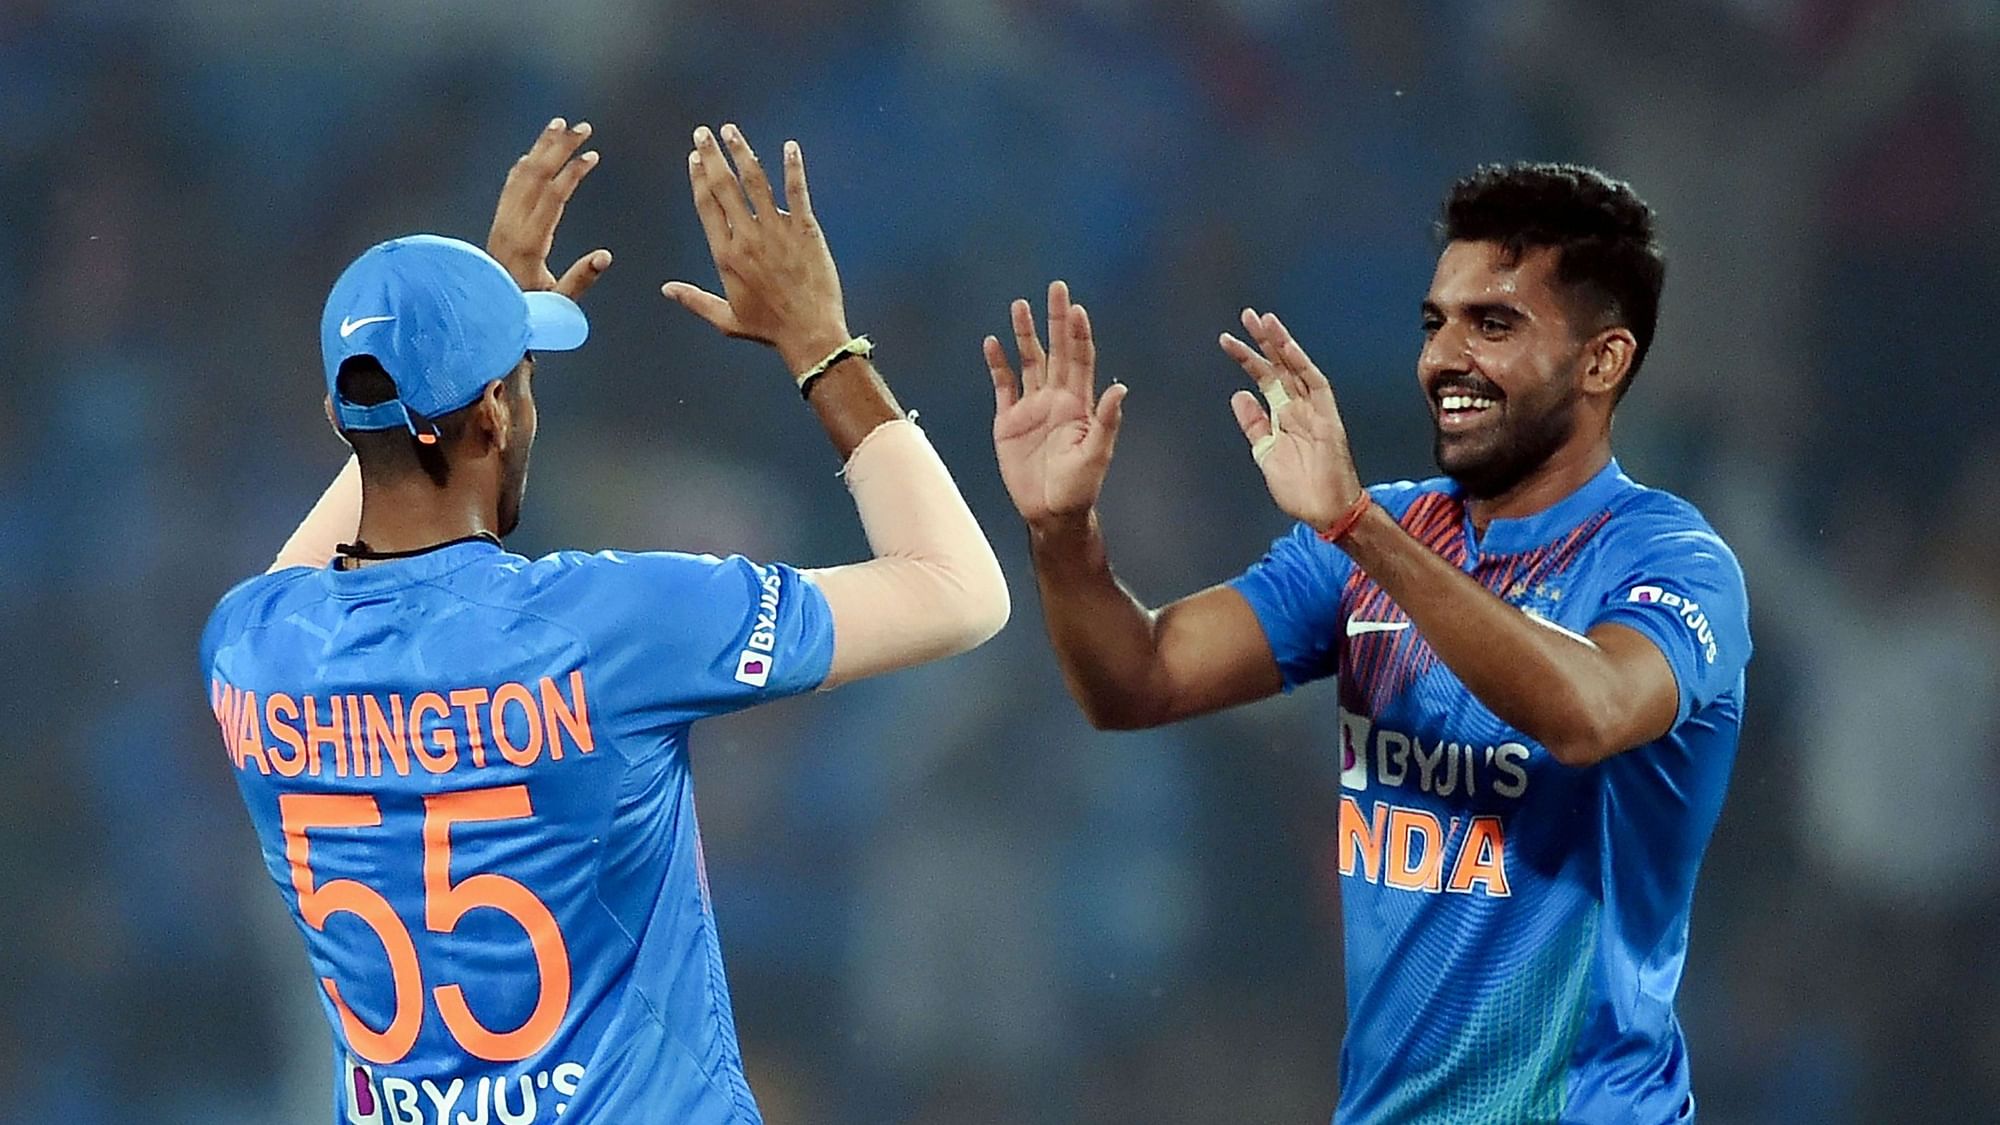 India fast bowler Deepak Chahar has moved up 88 slots to 42nd position in the latest ICC T20I rankings for players.